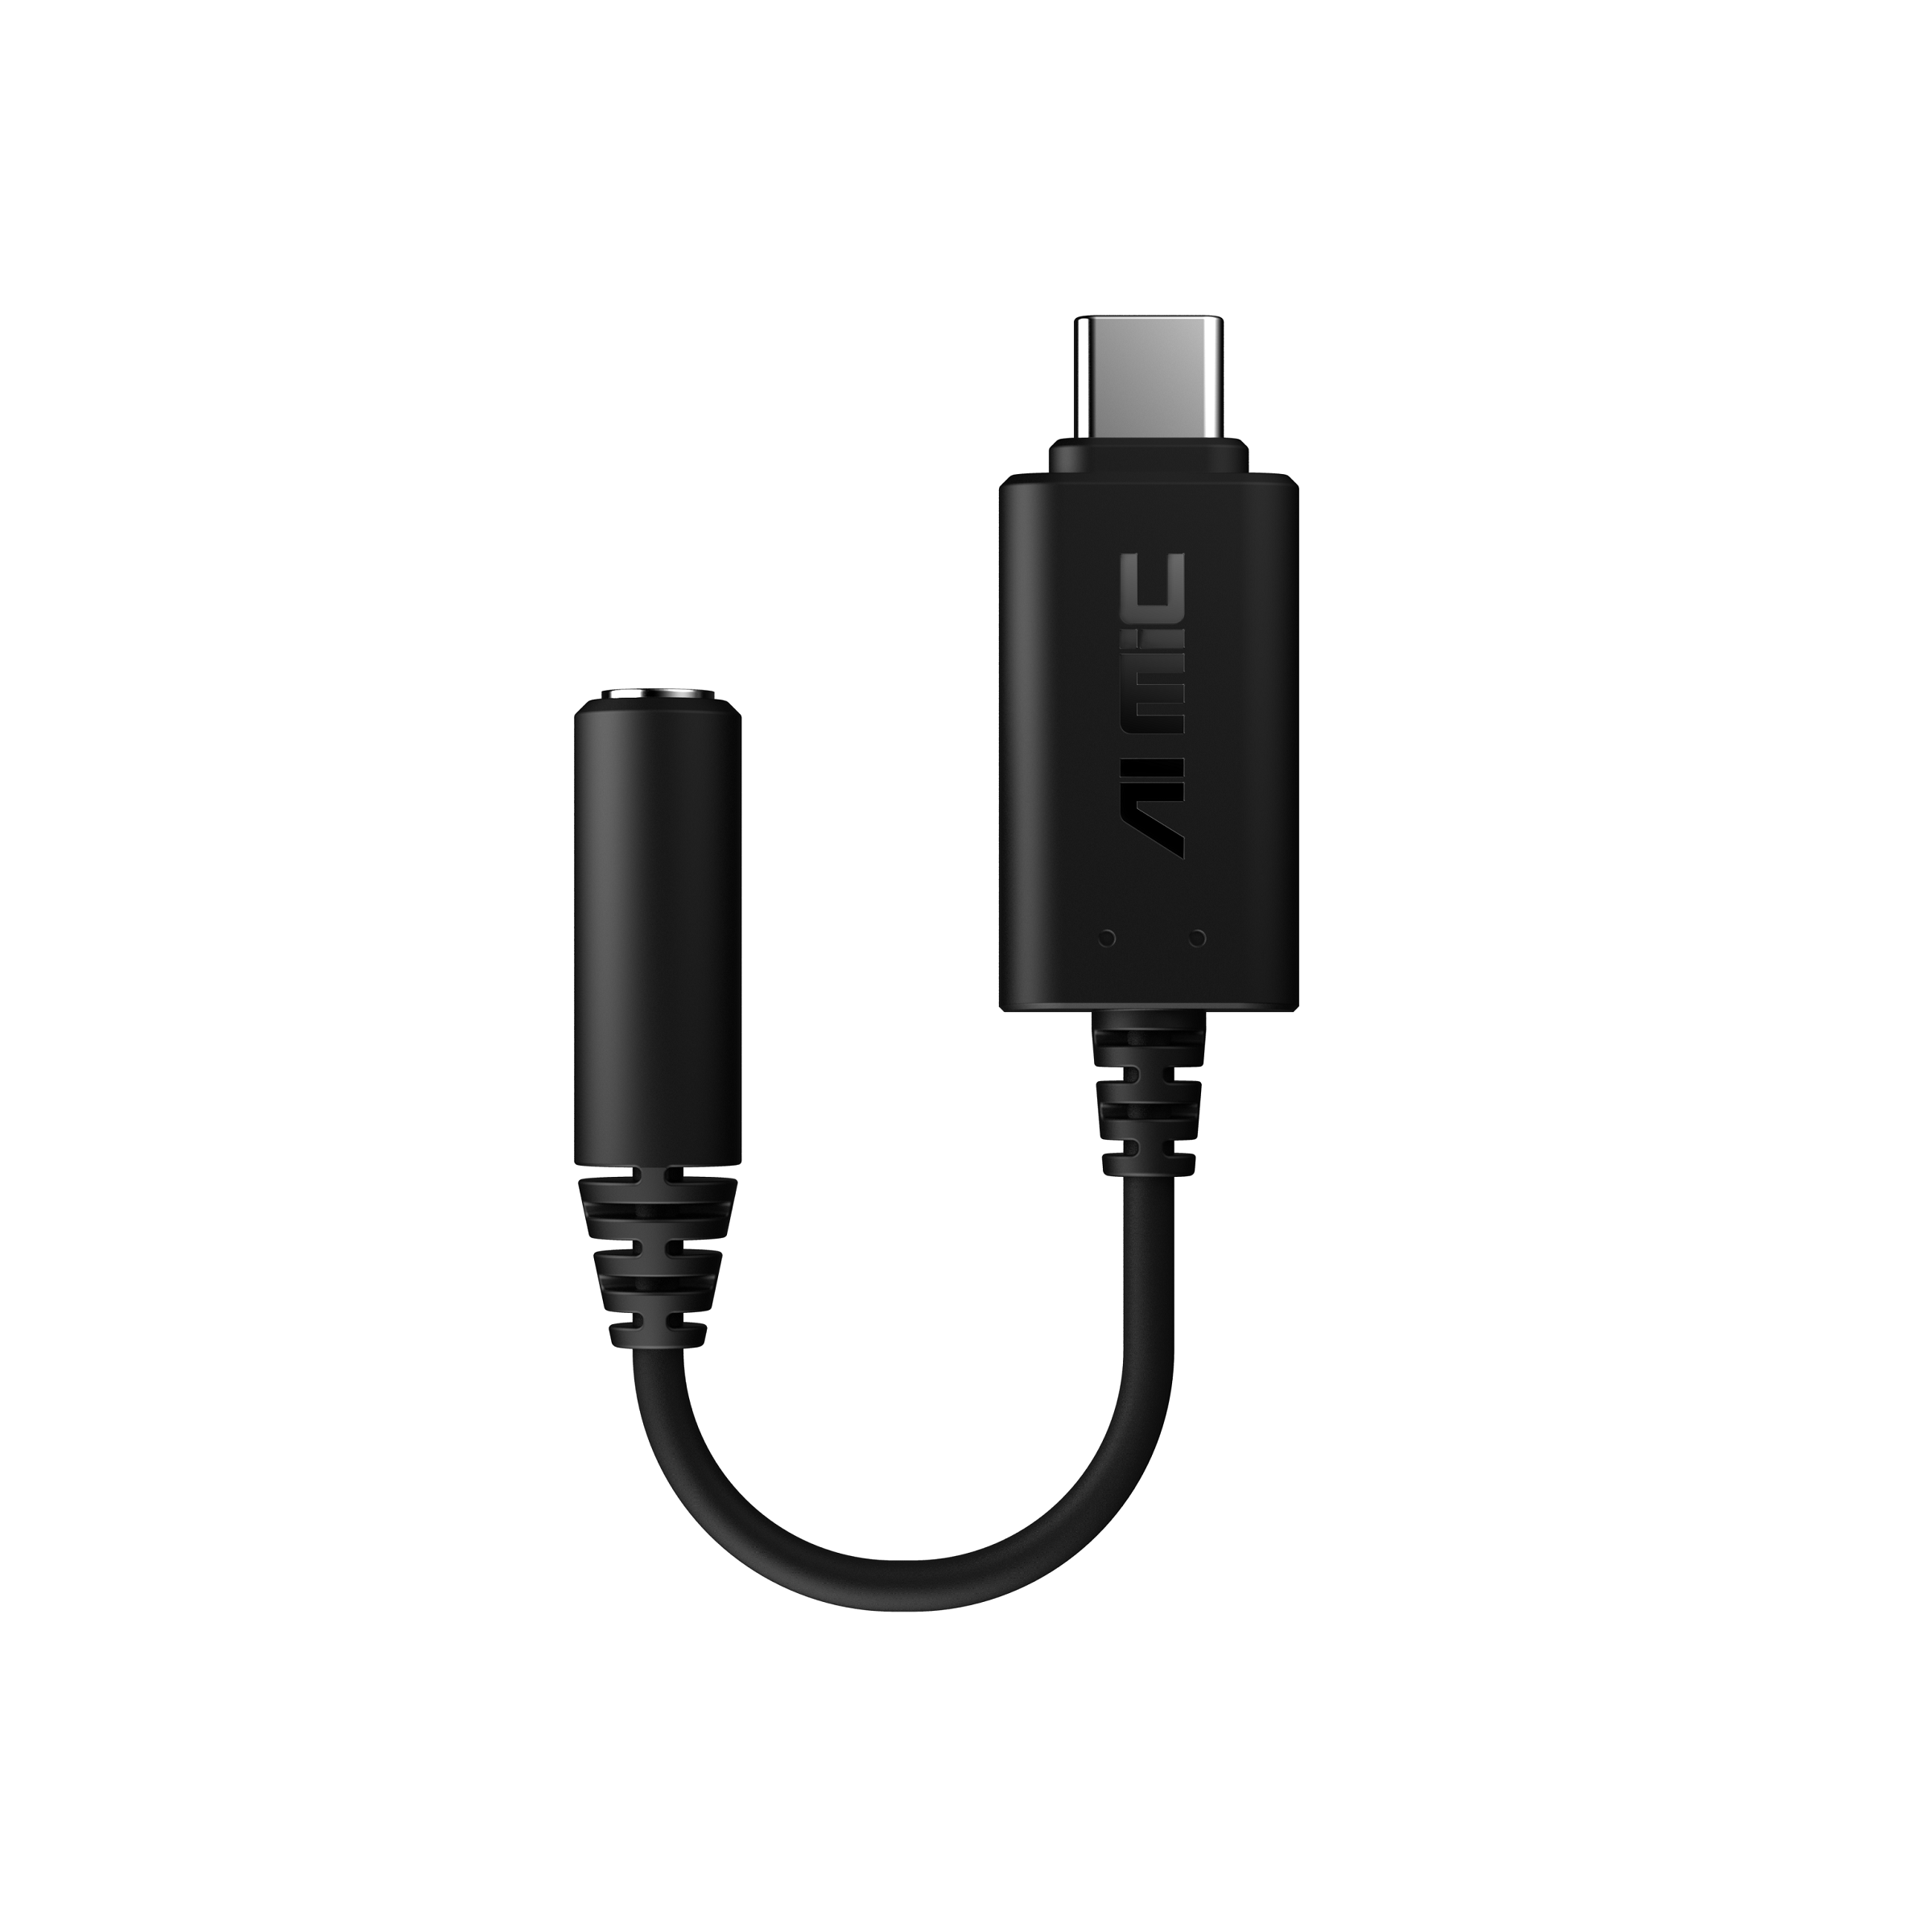 AI Noise-Canceling Mic Adapter